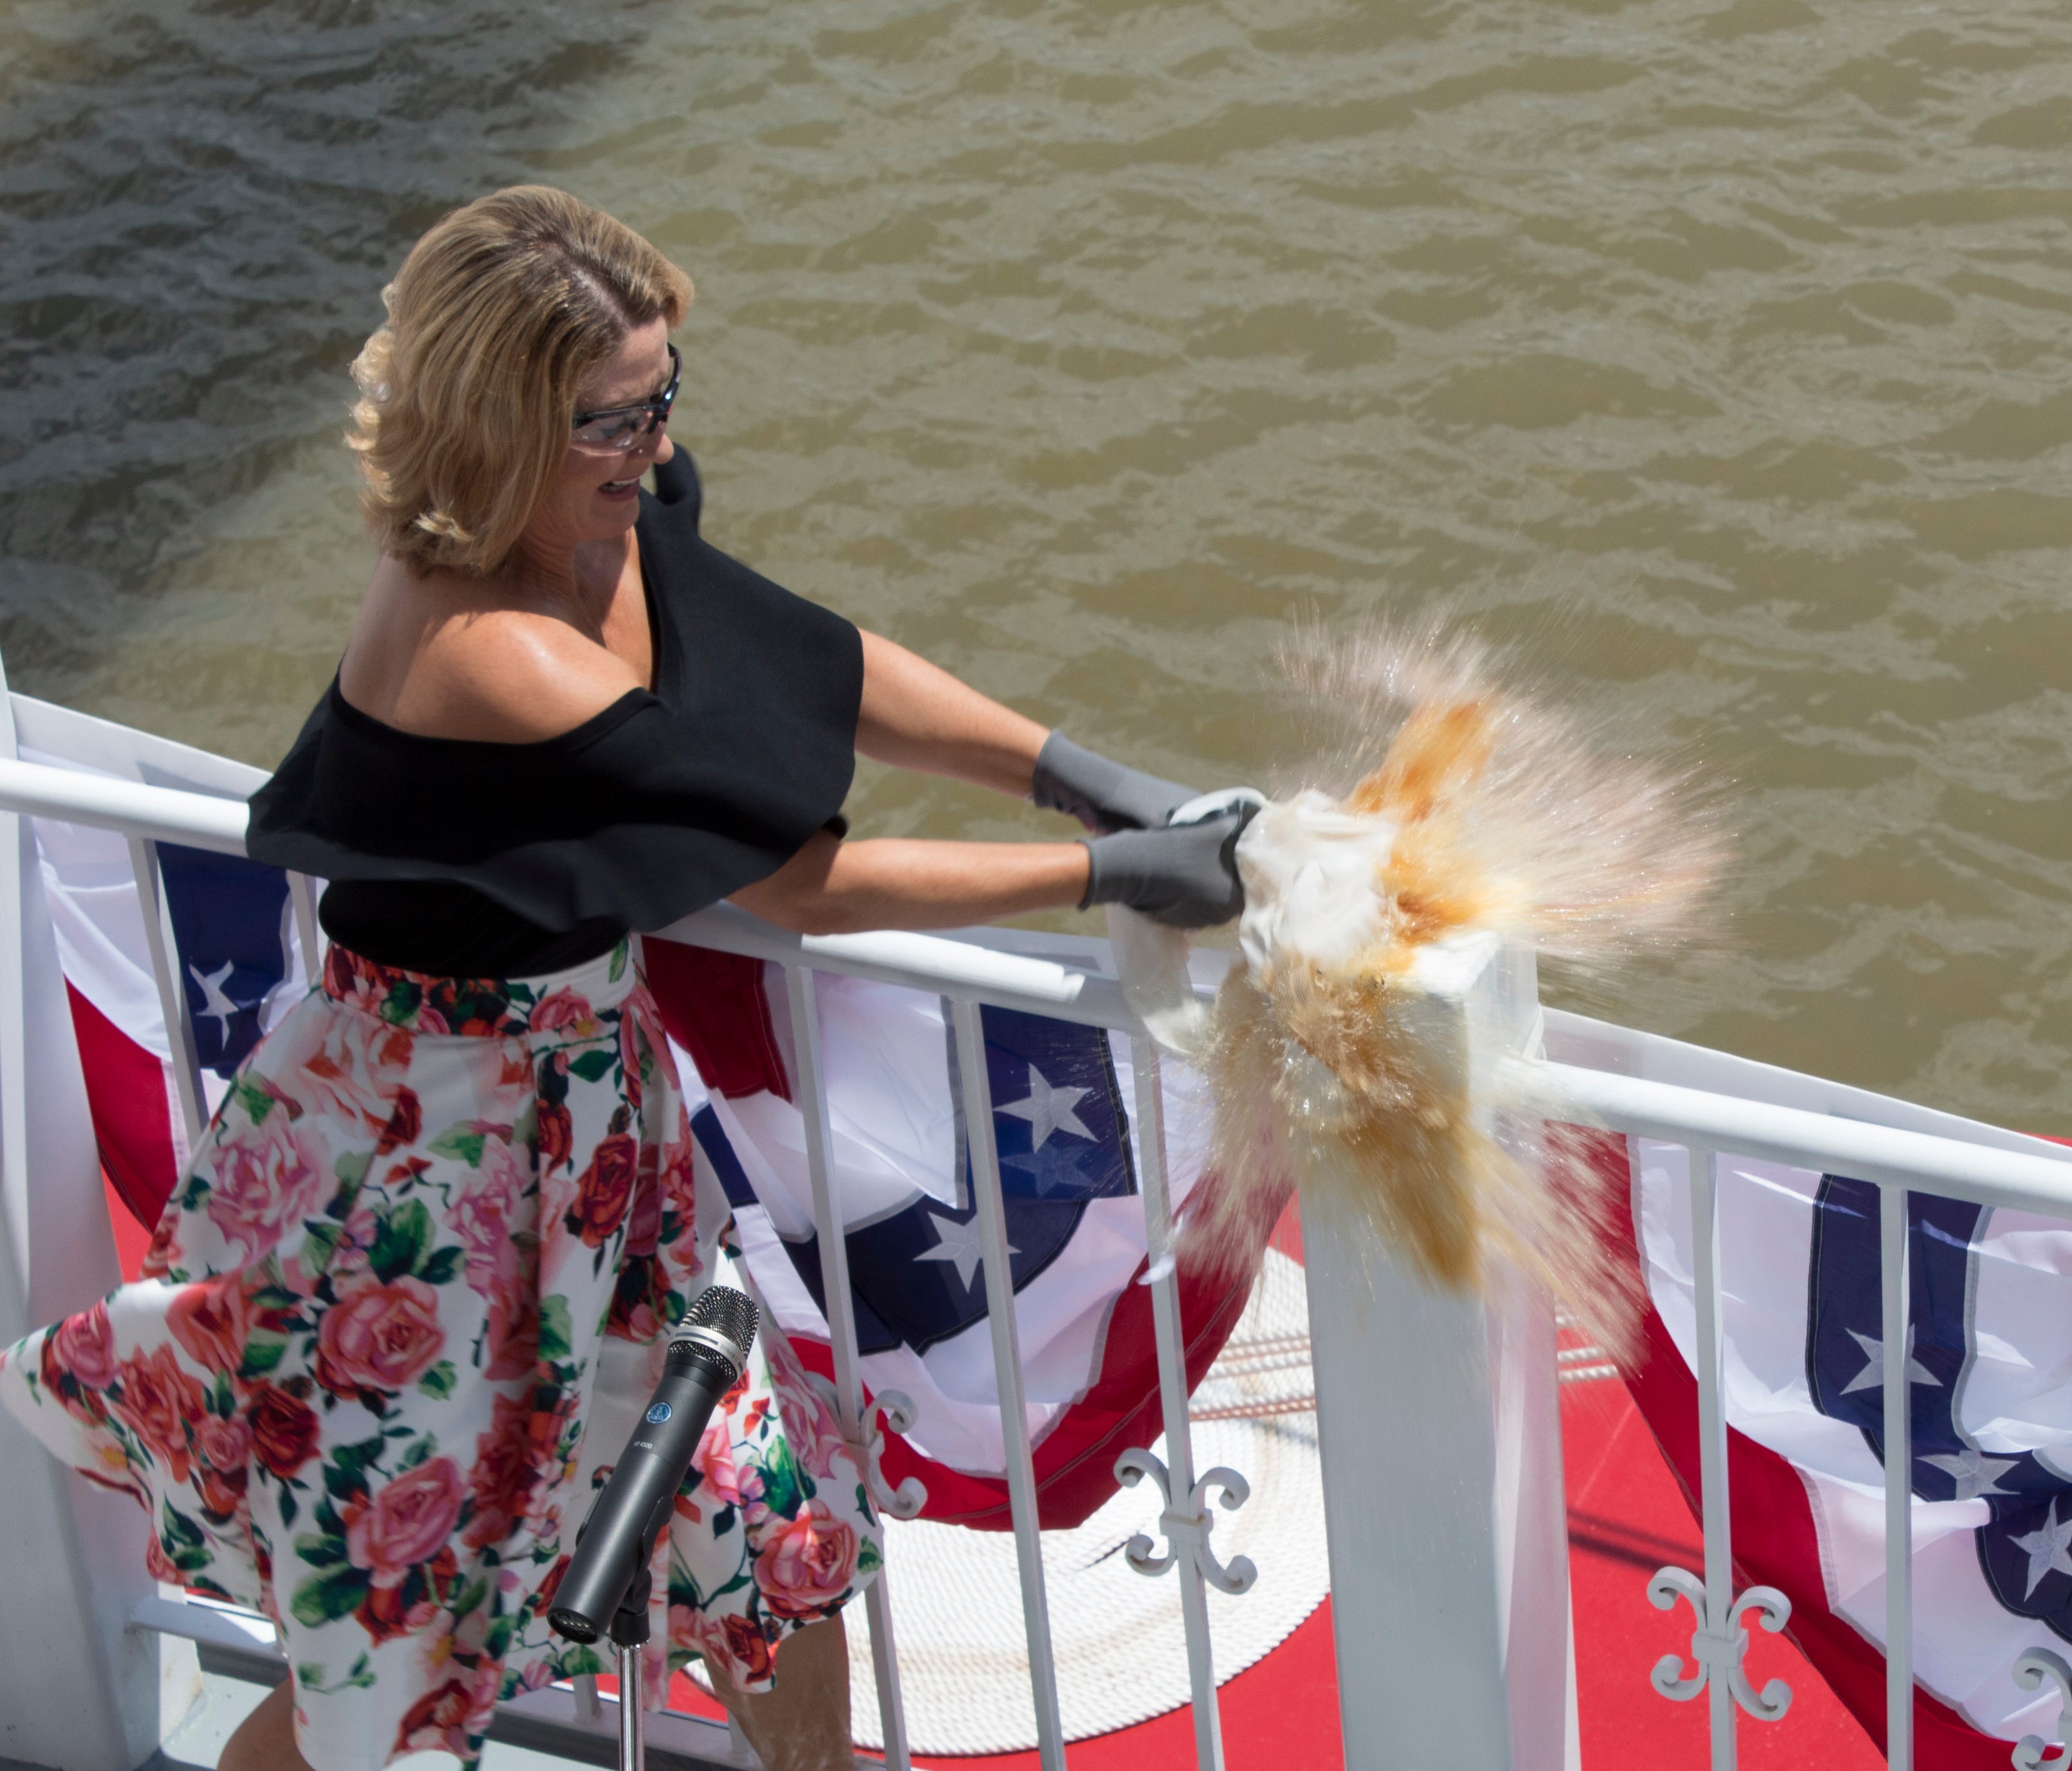 Marissa Applegate smashes a bottle of Maker's Mark bourbon against a railing of the American Duchess riverboat to christen it on Aug. 14, 2017.